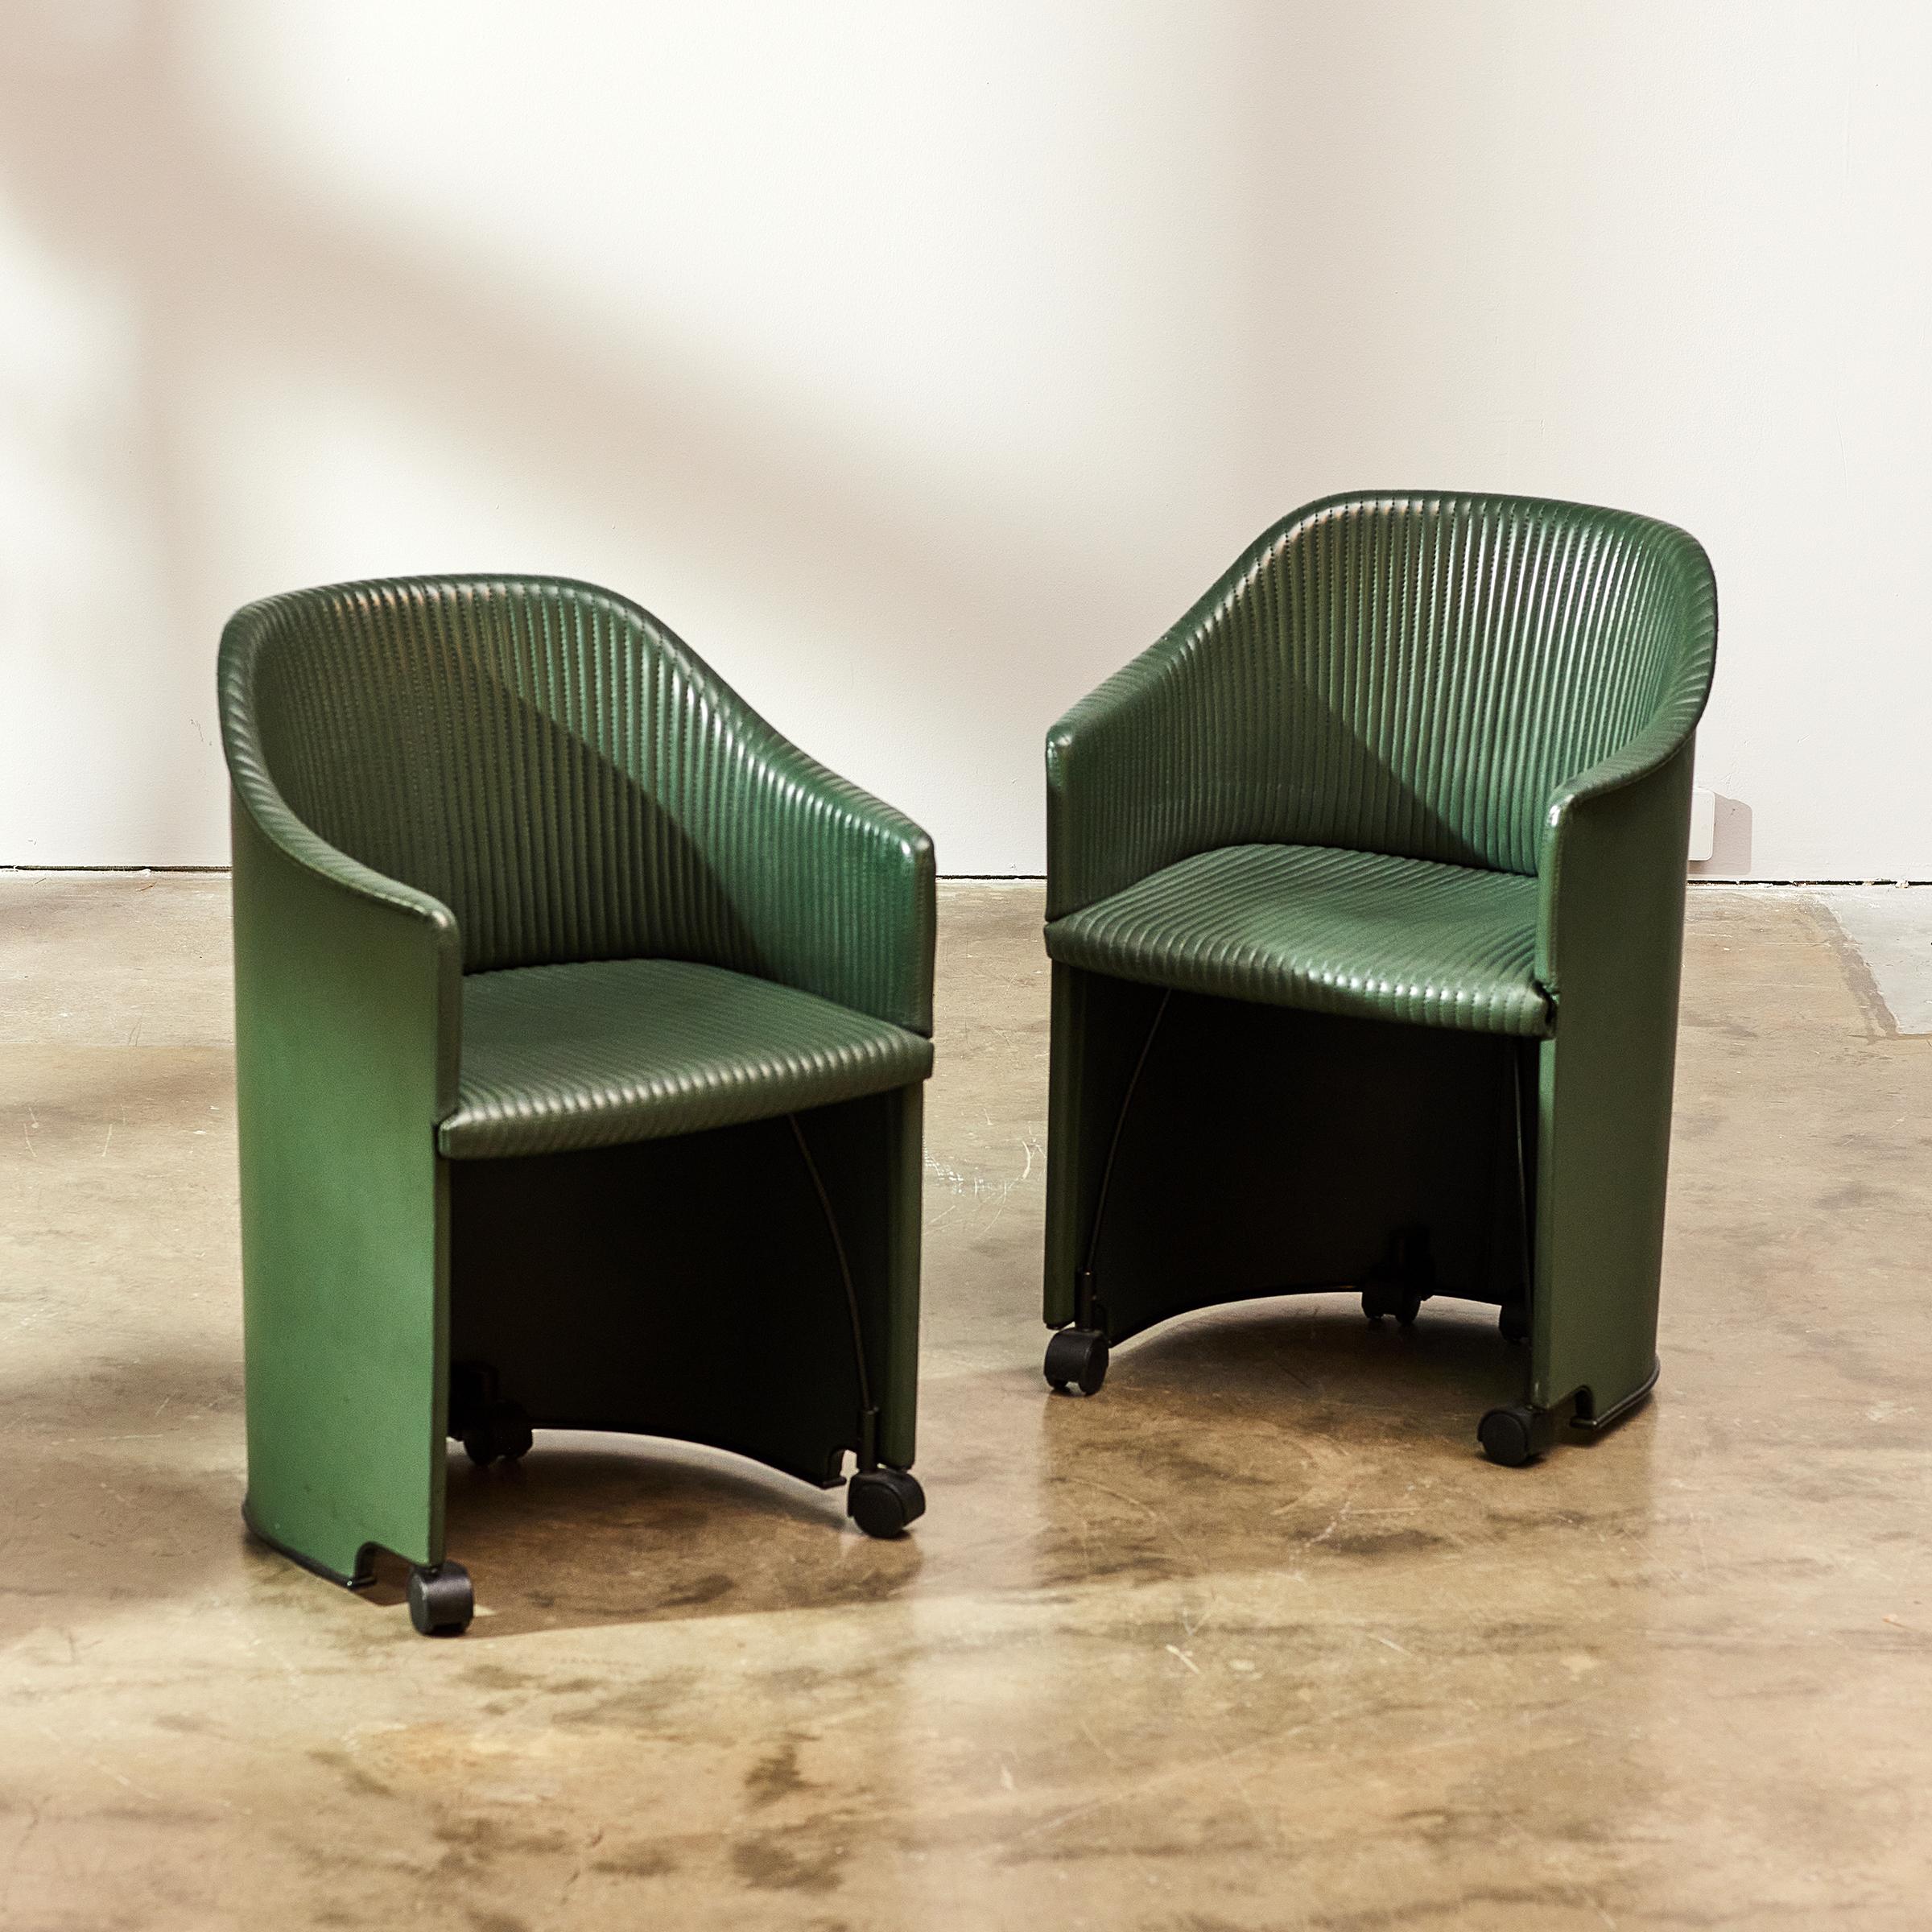 Post-Modern Leather Armchairs by Afra & Tobia Scarpa for Maxalto, Artona Model, Italy, 1980s For Sale